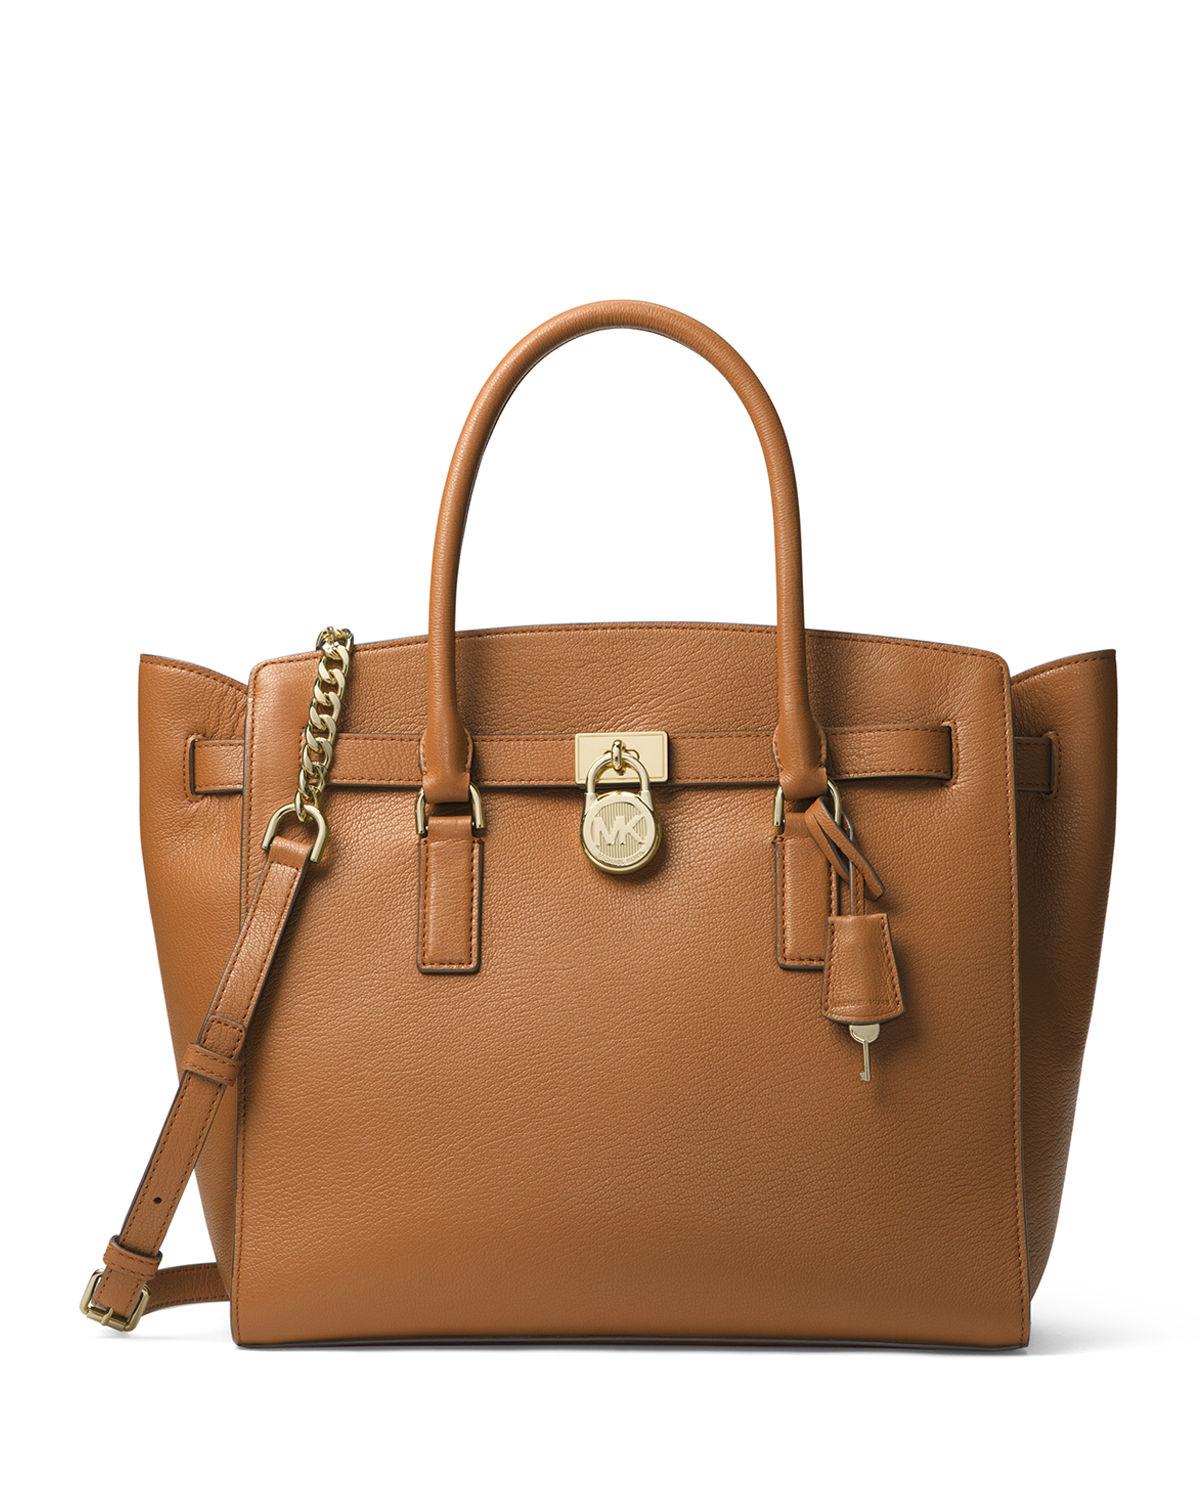 MICHAEL Michael Kors Hamilton Extra Large Leather Tote Bag in Brown - Lyst